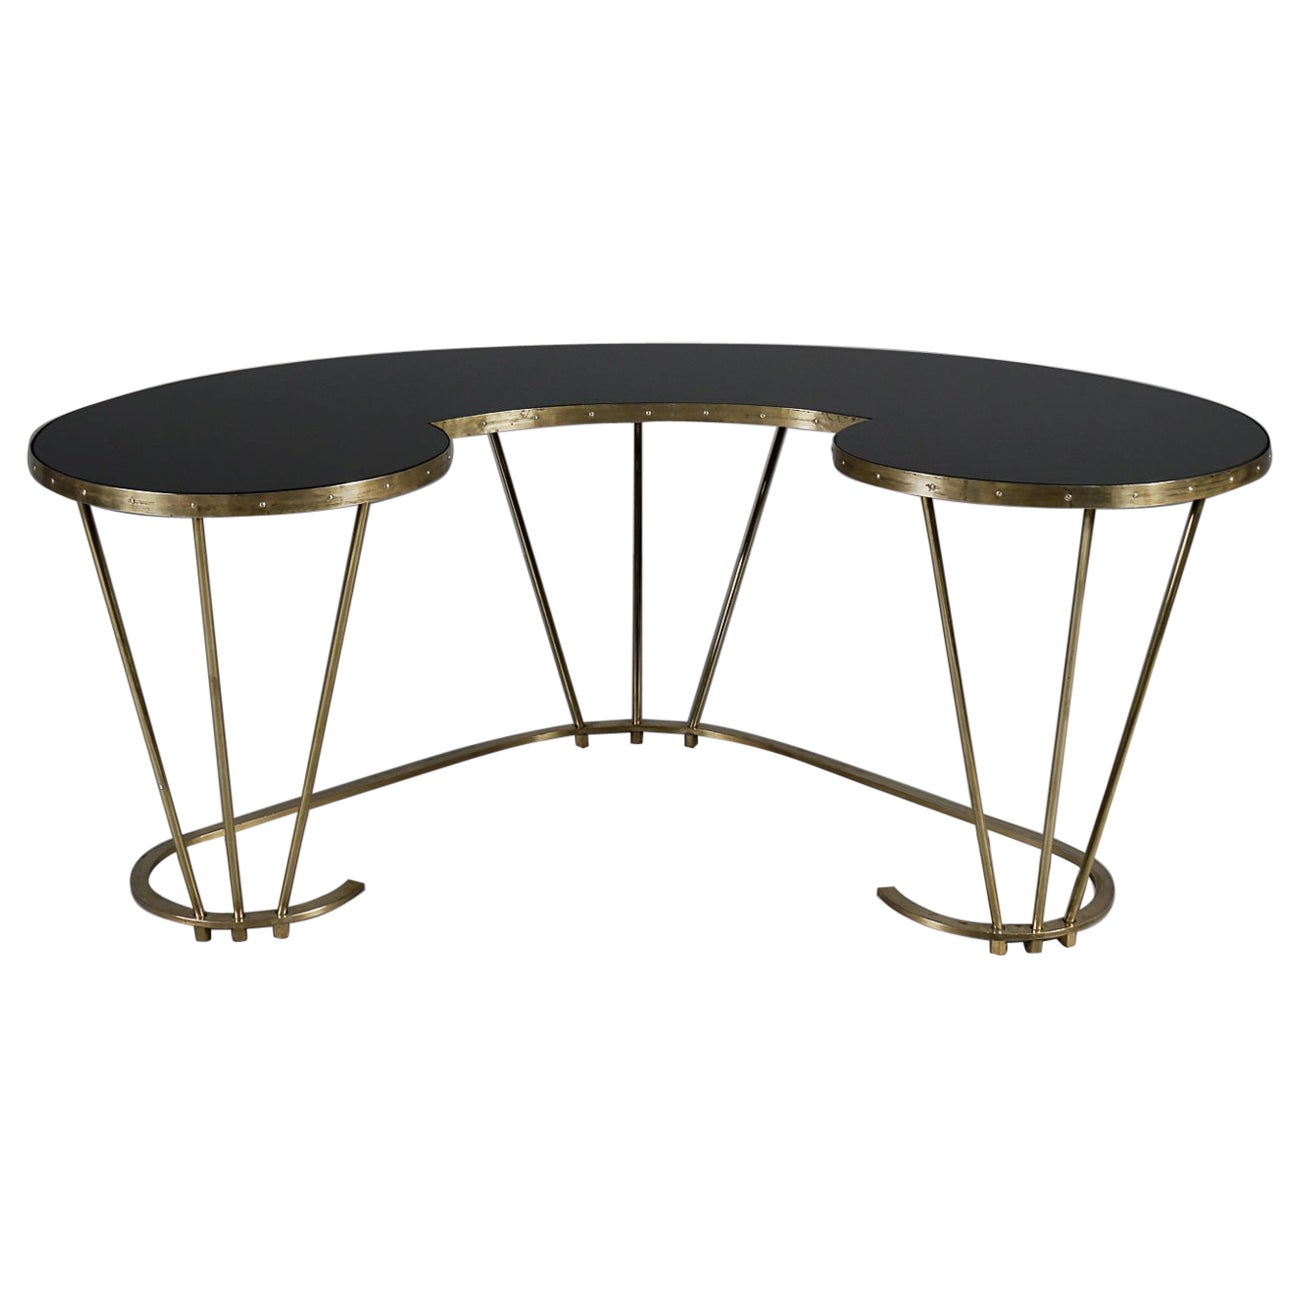 Unique Desk or Dressing Table Made of Solid Brass and Black Glass, 1950s, Italy